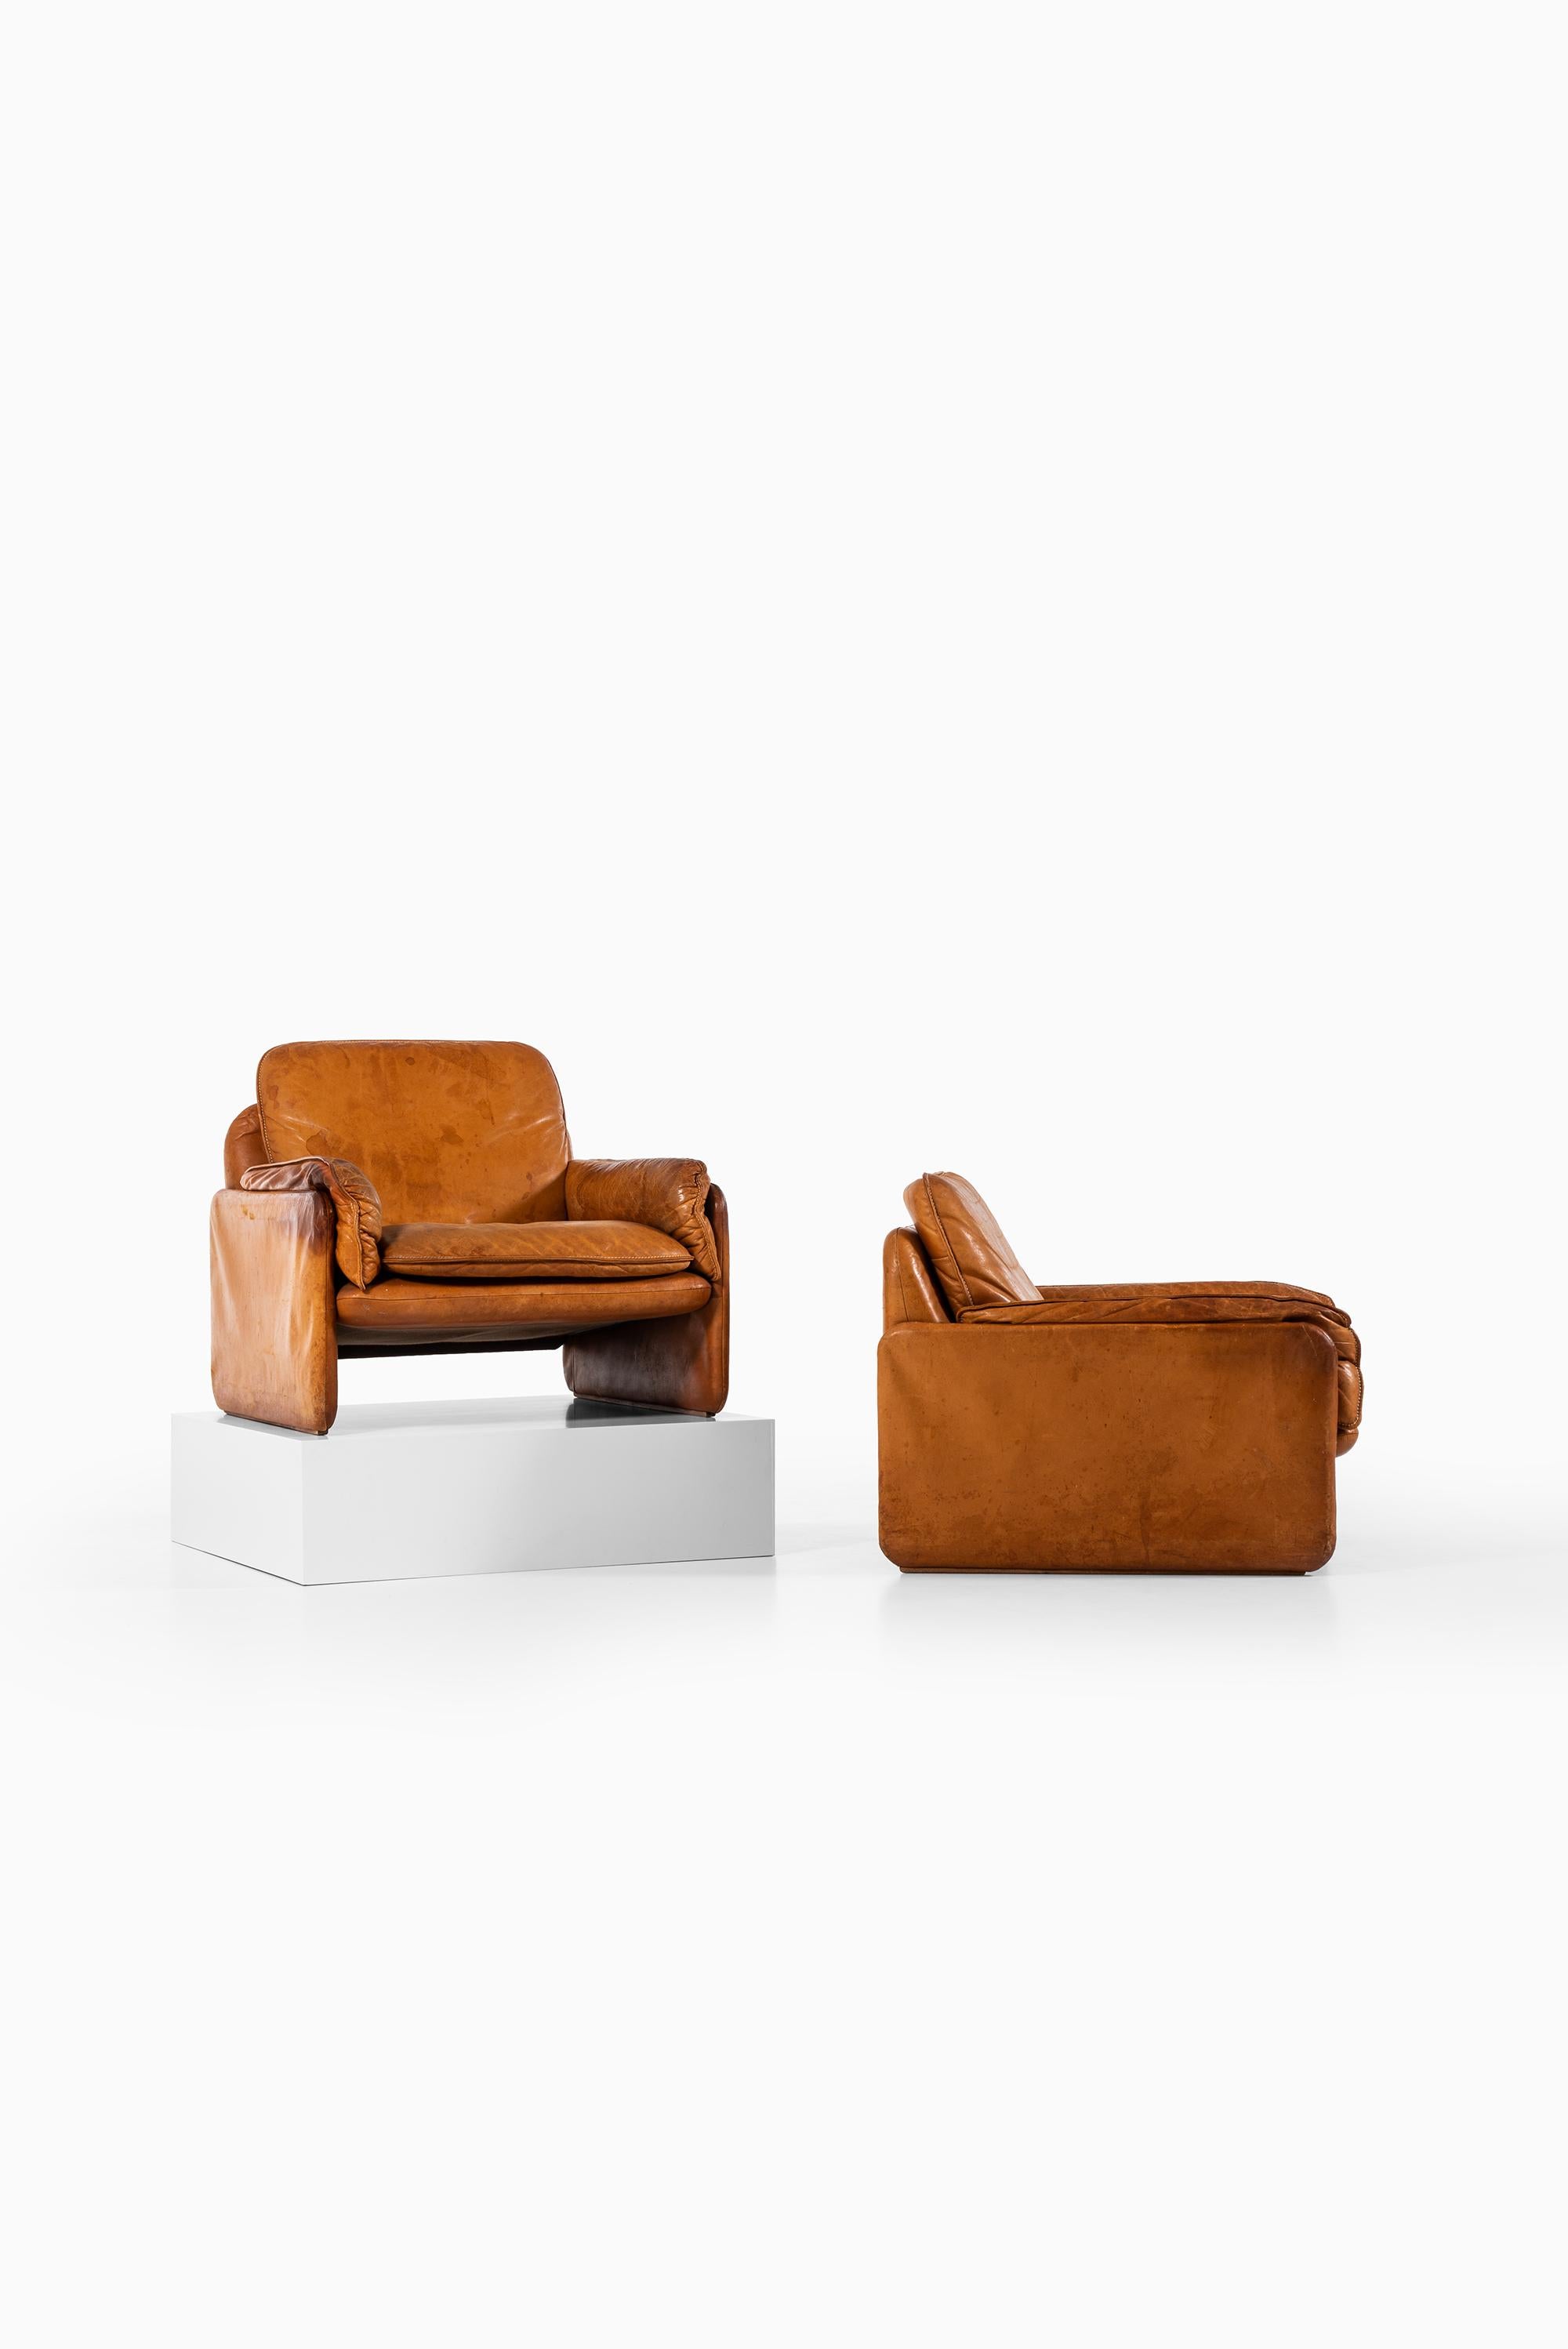 Eric Merthen Easy Chairs Model Amiral Produced by Ire Möbler in Sweden 5